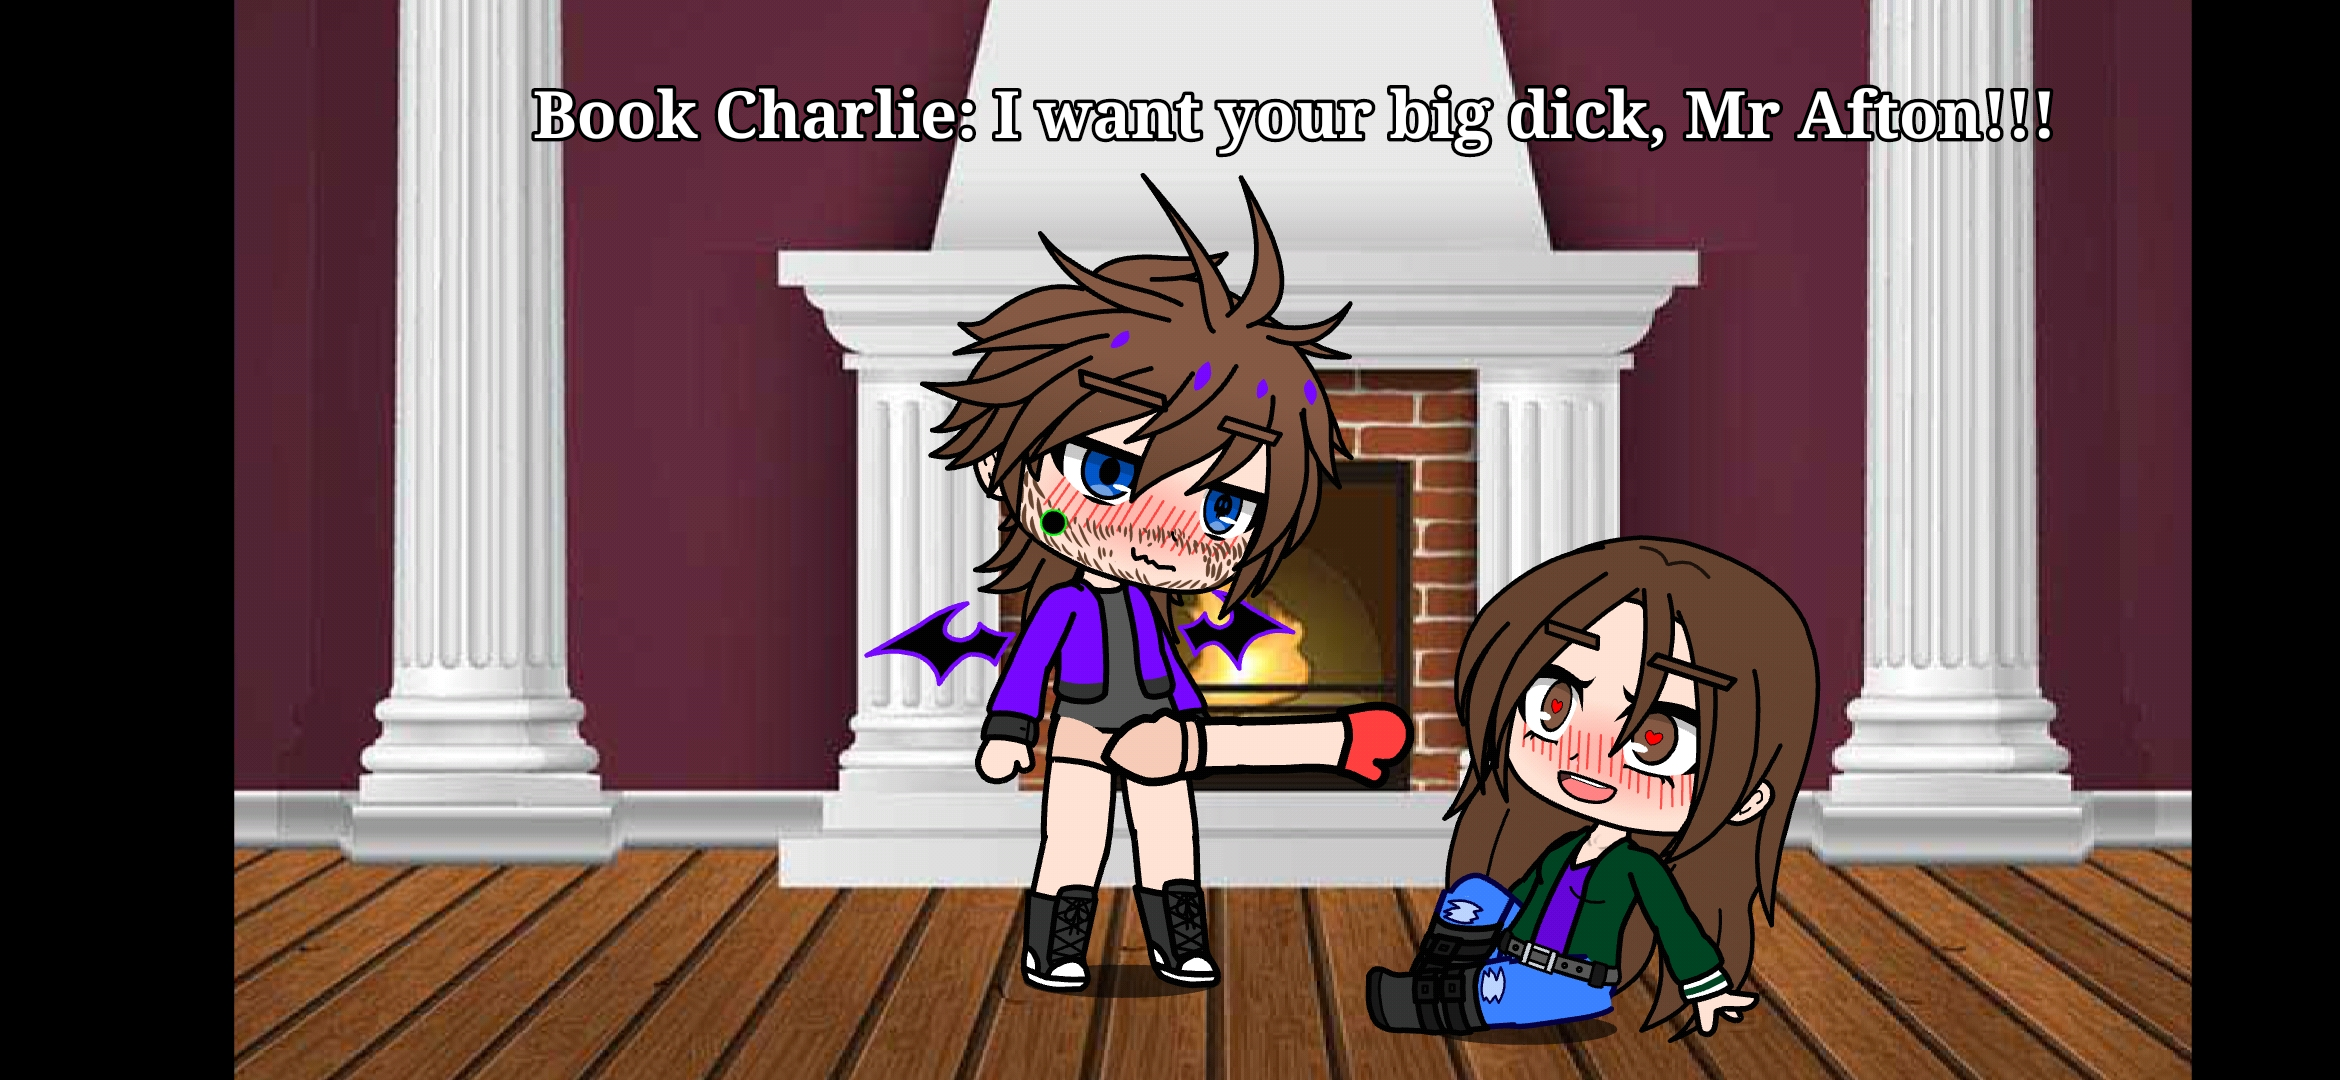 William Afton fuck Book Charlie Emily